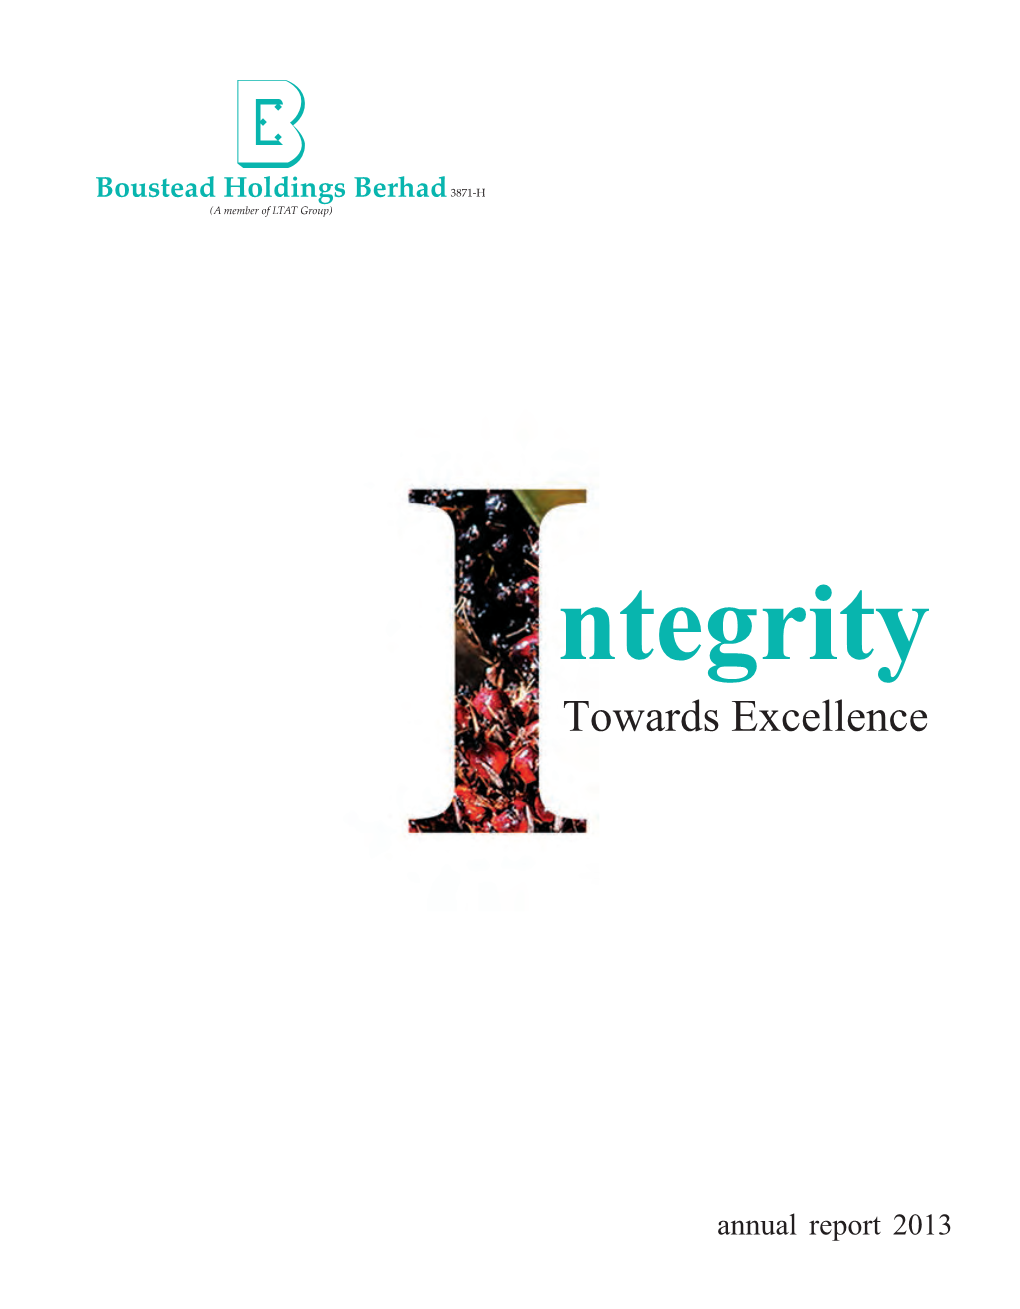 Ntegrity Towards Excellence Annual Report 2013